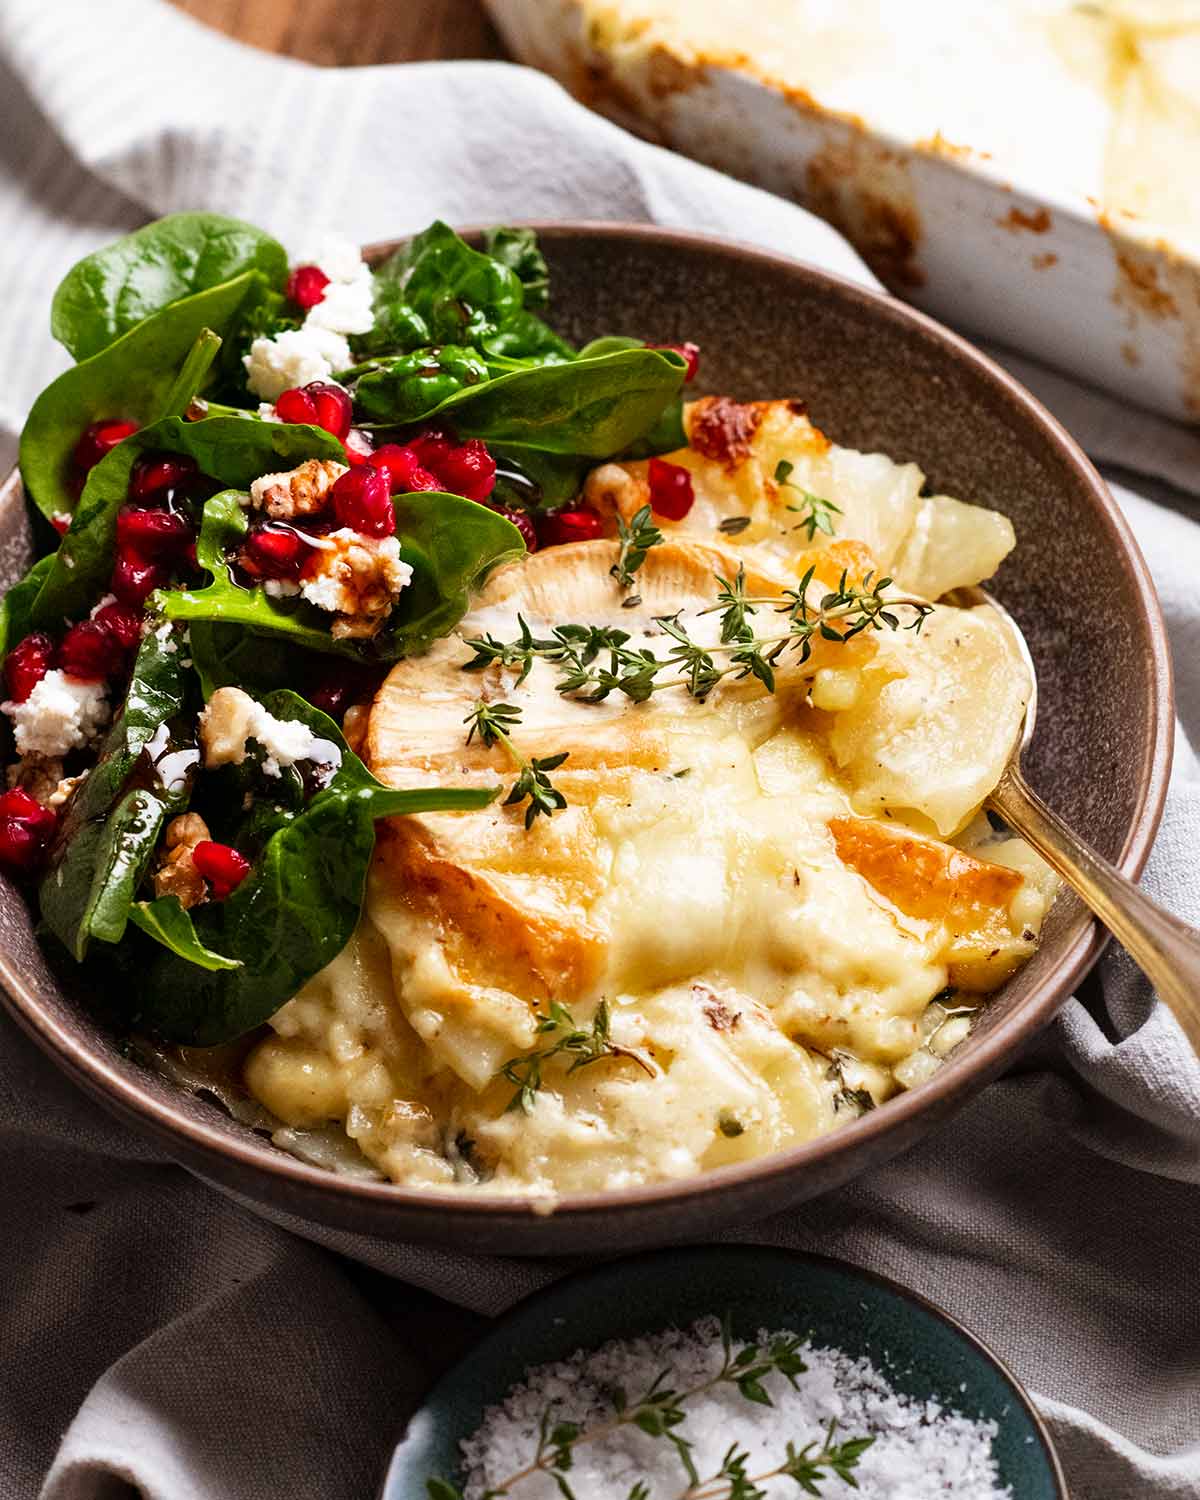 Brie Dauphinoise Potatoes in a bowl